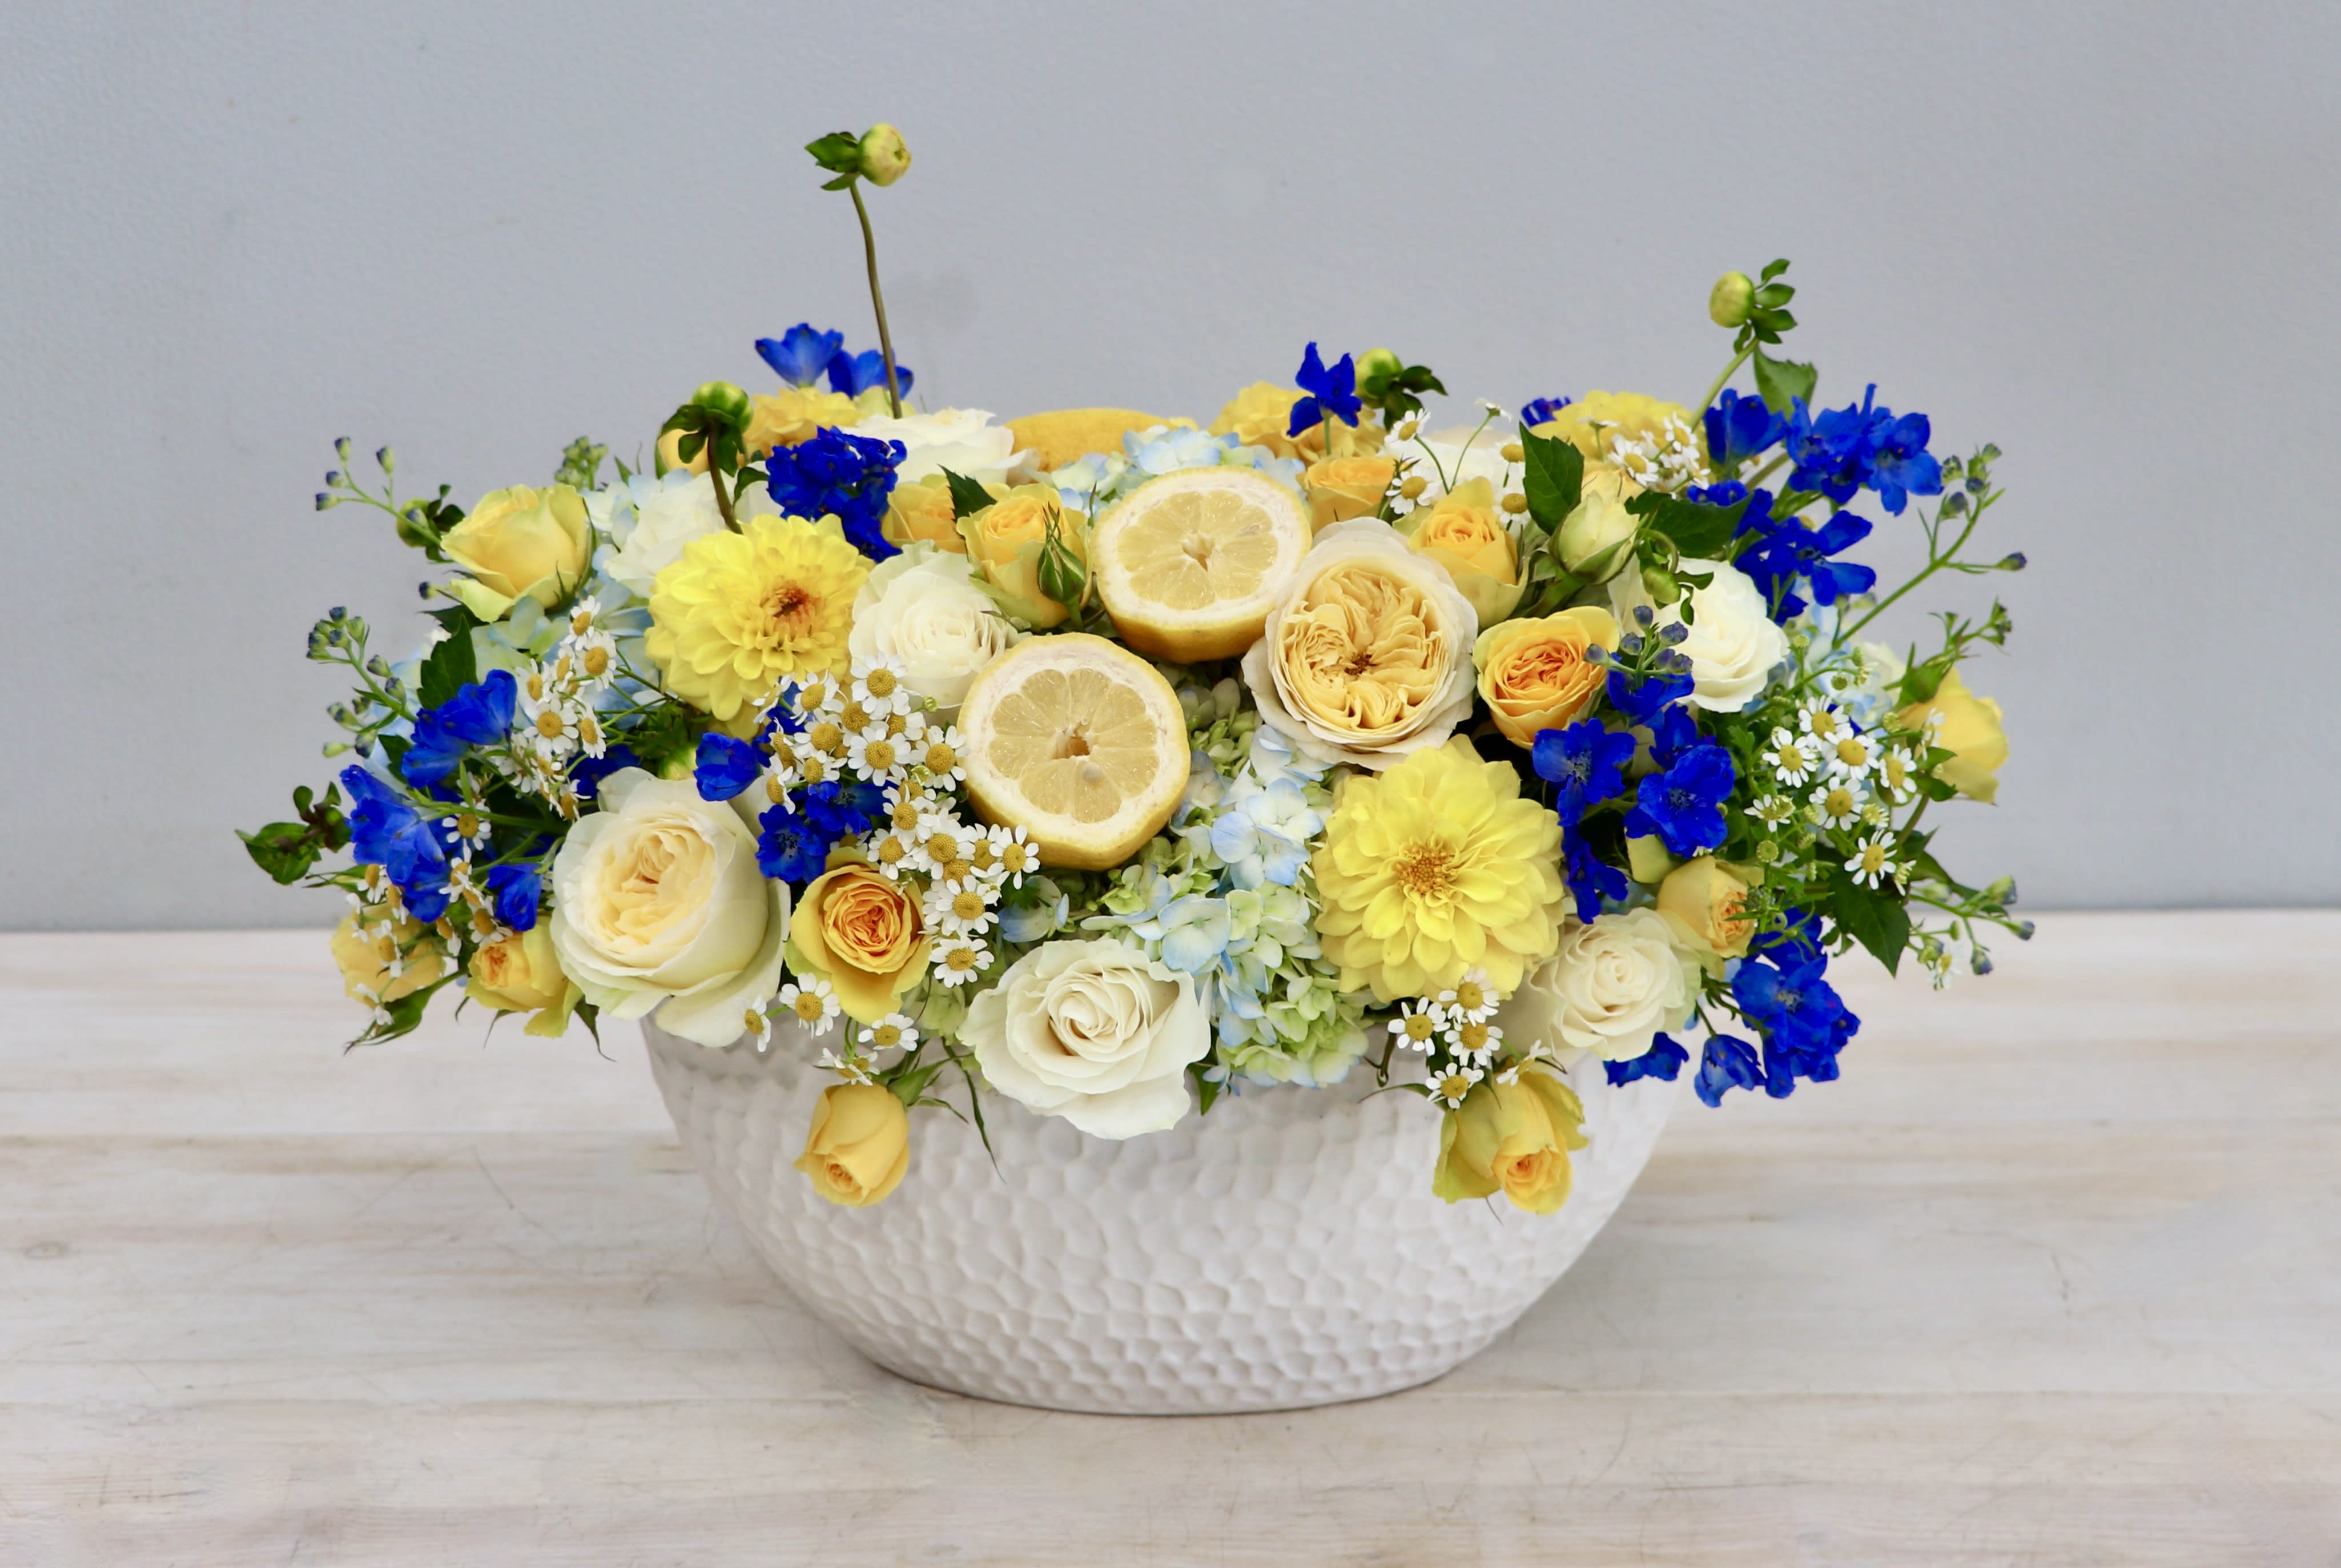 Citrus Serenade - My Glendale Florist  - This vibrant floral arrangement features a beautiful combination of dahlias, delphiniums and roses in bright blues, soft yellows, and crisp whites. Adding a citrus twist, it is adorned with slices of fresh lemons that add a pop of color and a delightful fragrance to the arrangement. Perfect for a summer event or a cheerful gift, this arrangement is sure to brighten any room.